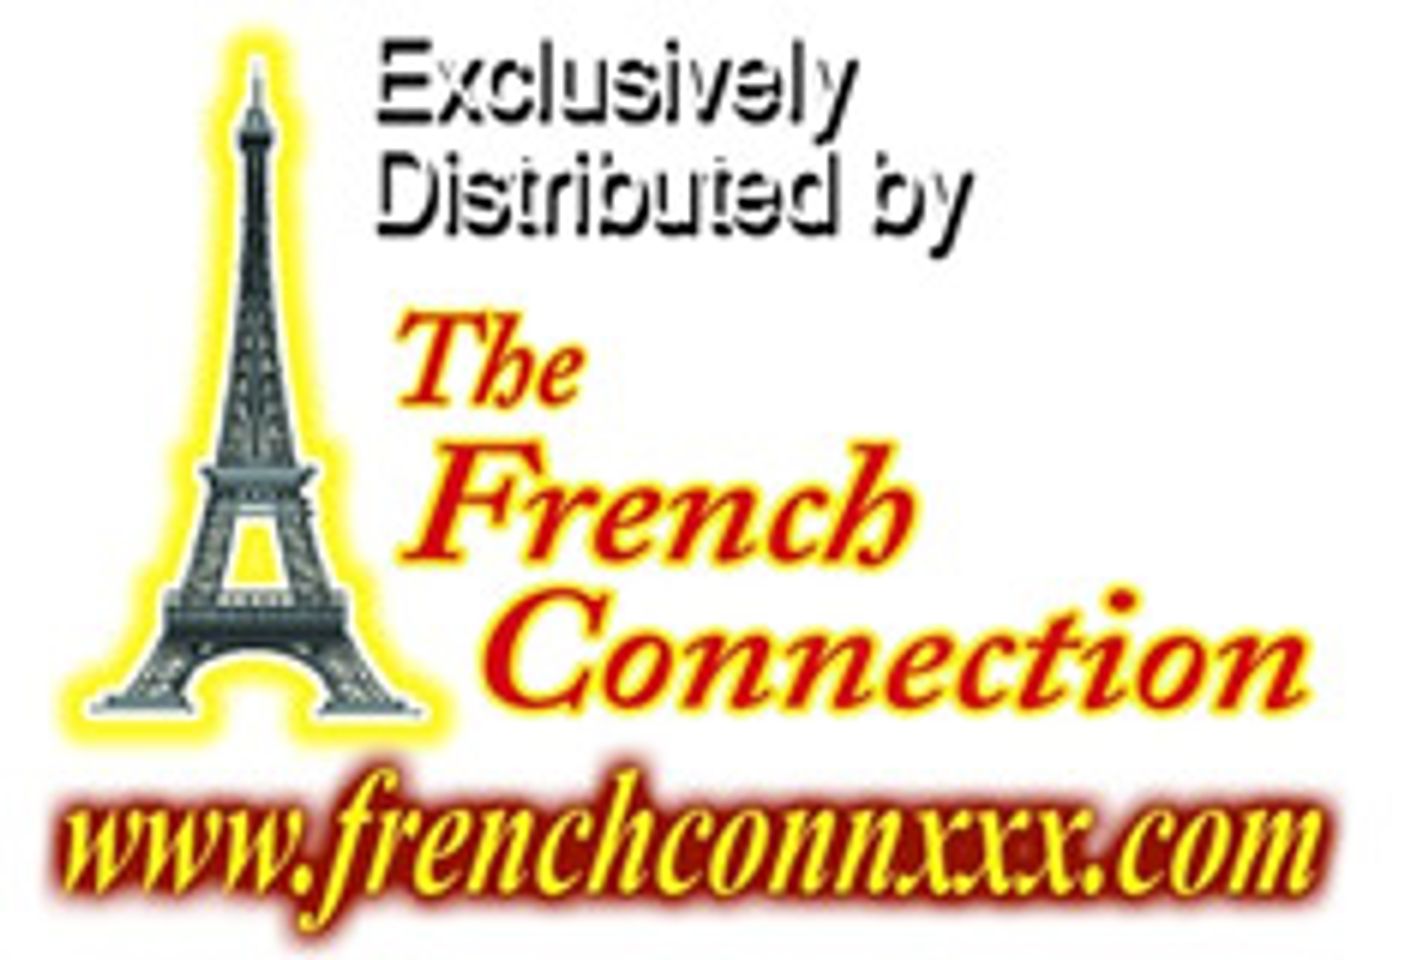 Company Profile: The French Connection